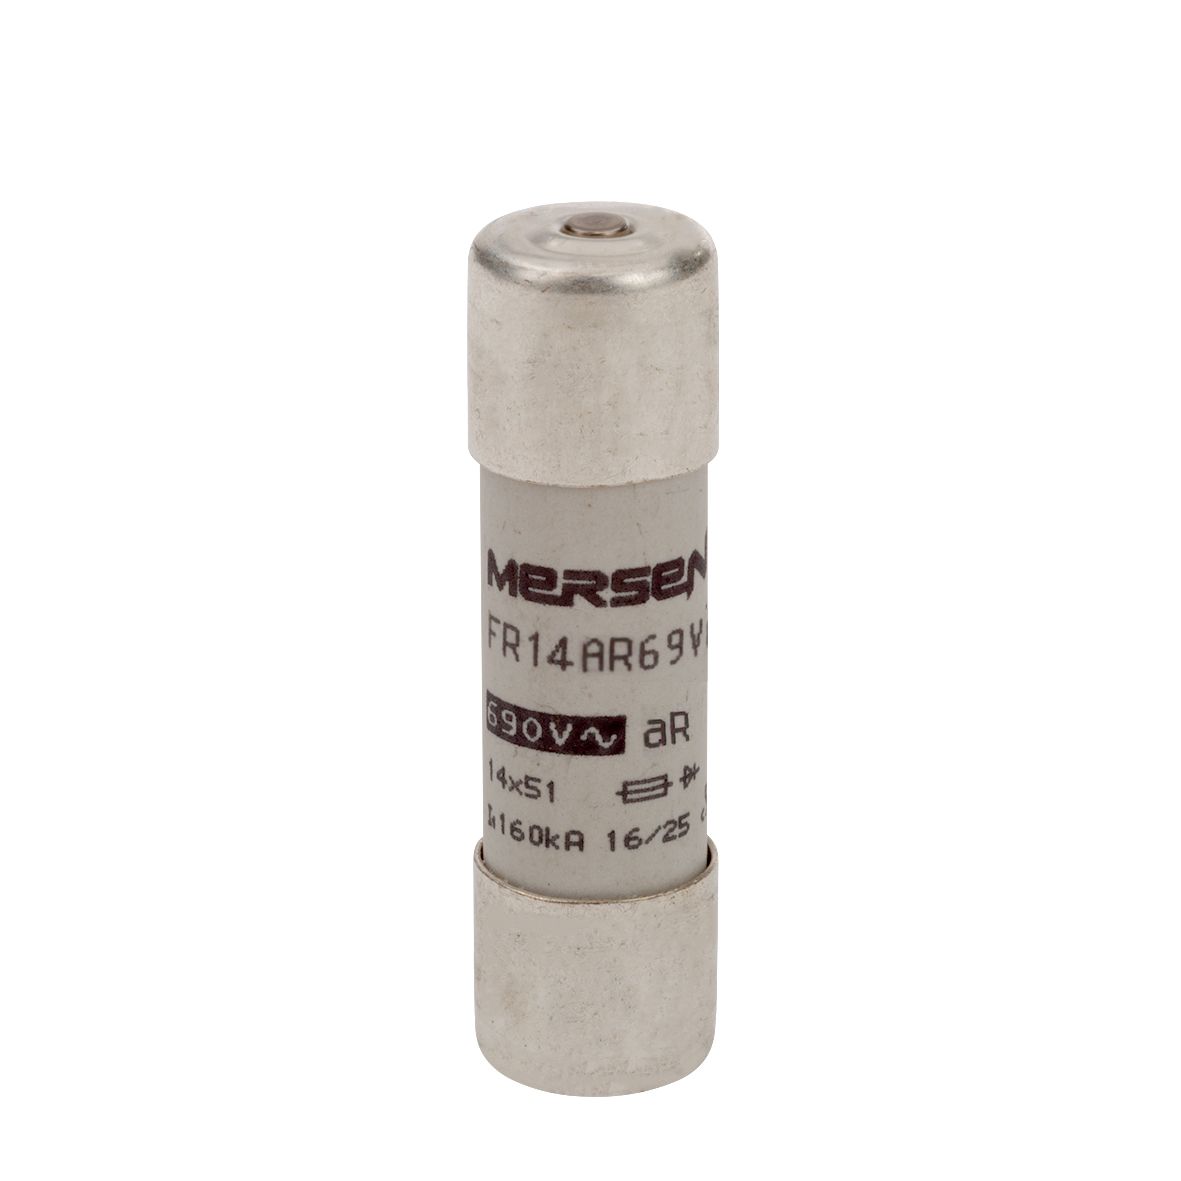 Y1056664 - Cylindrical fuse-link aR 690VAC 14x51, 40A, with indicator